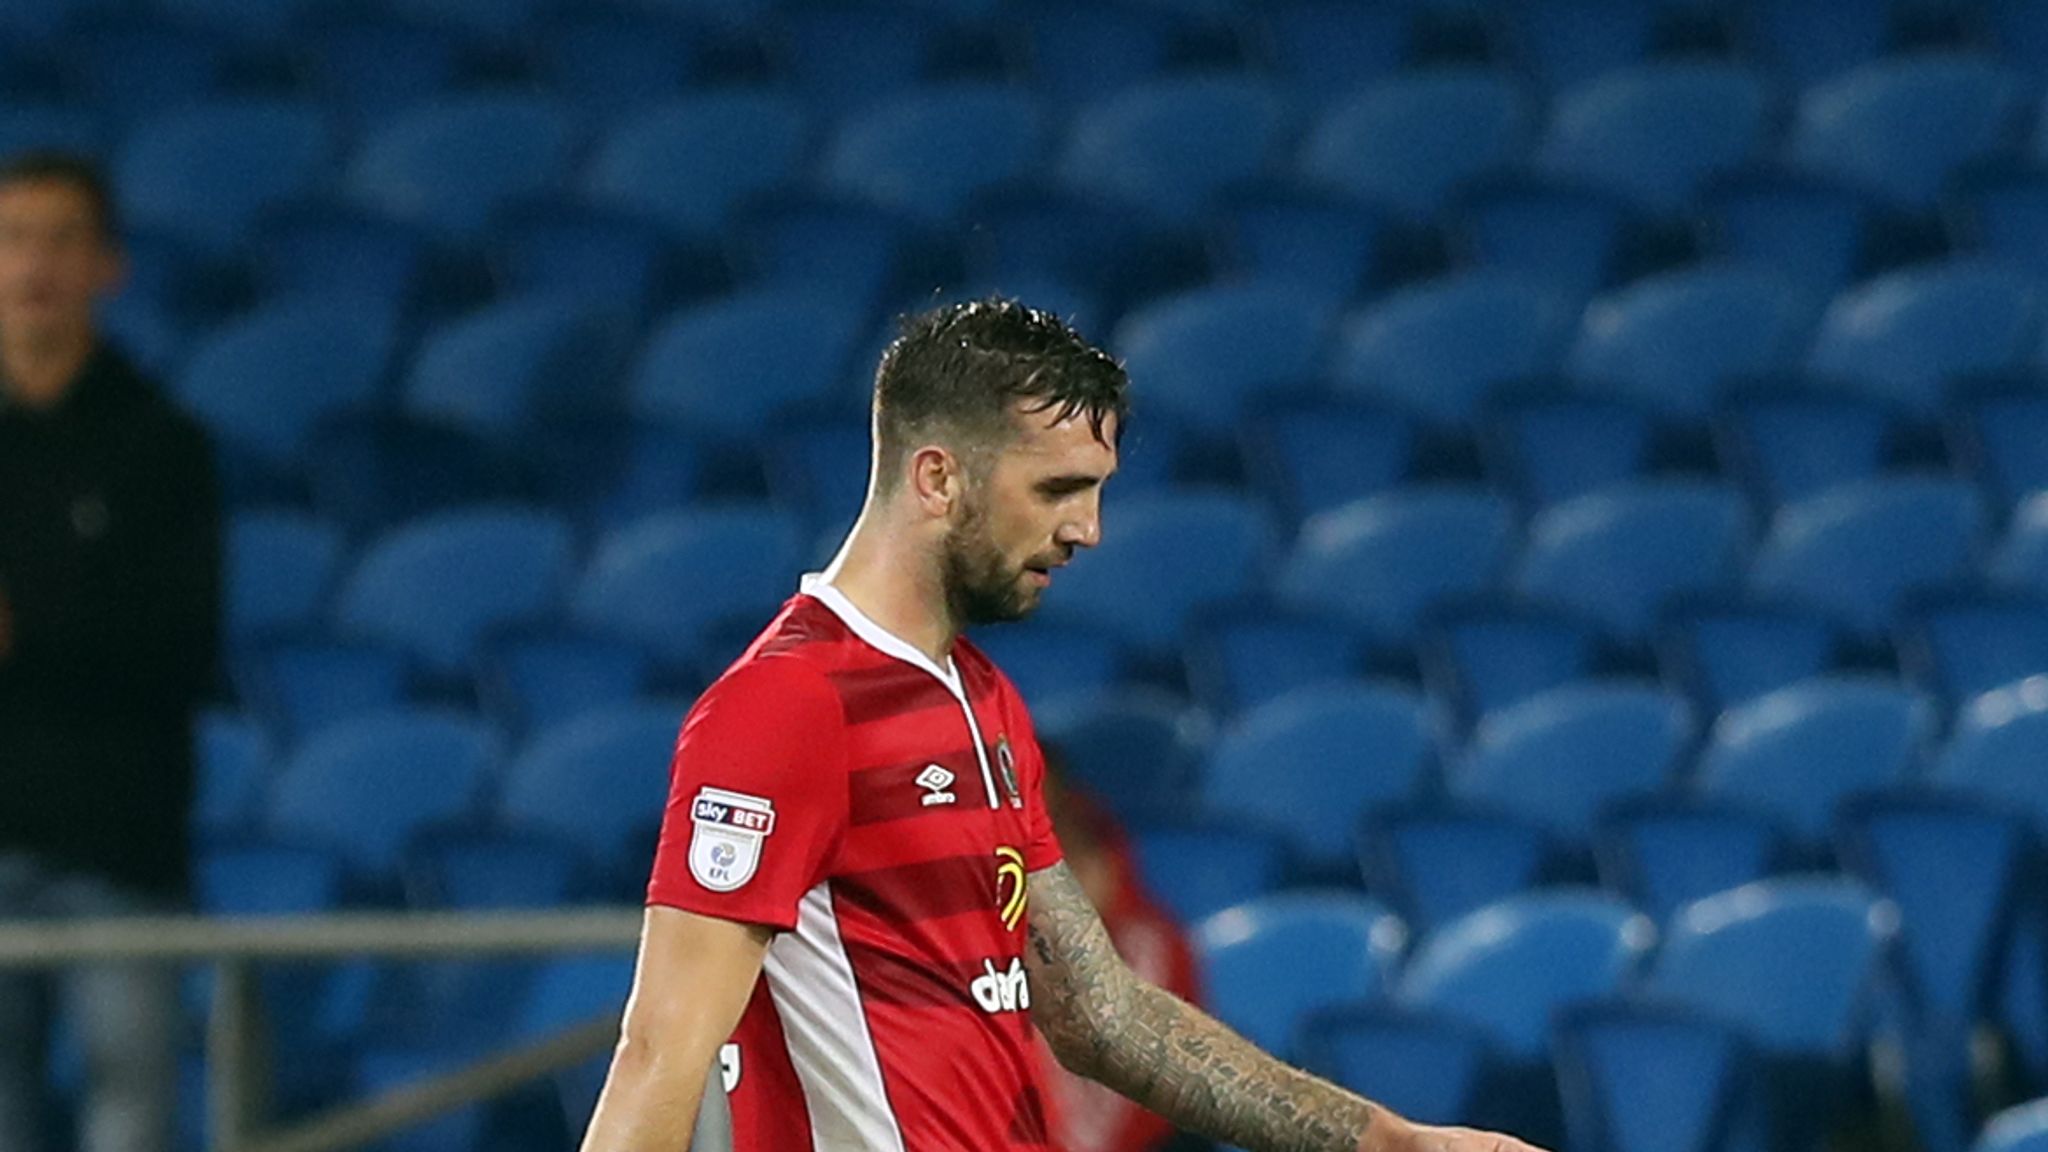 Shane Duffy scores three own goals in two games | Football News | Sky Sports